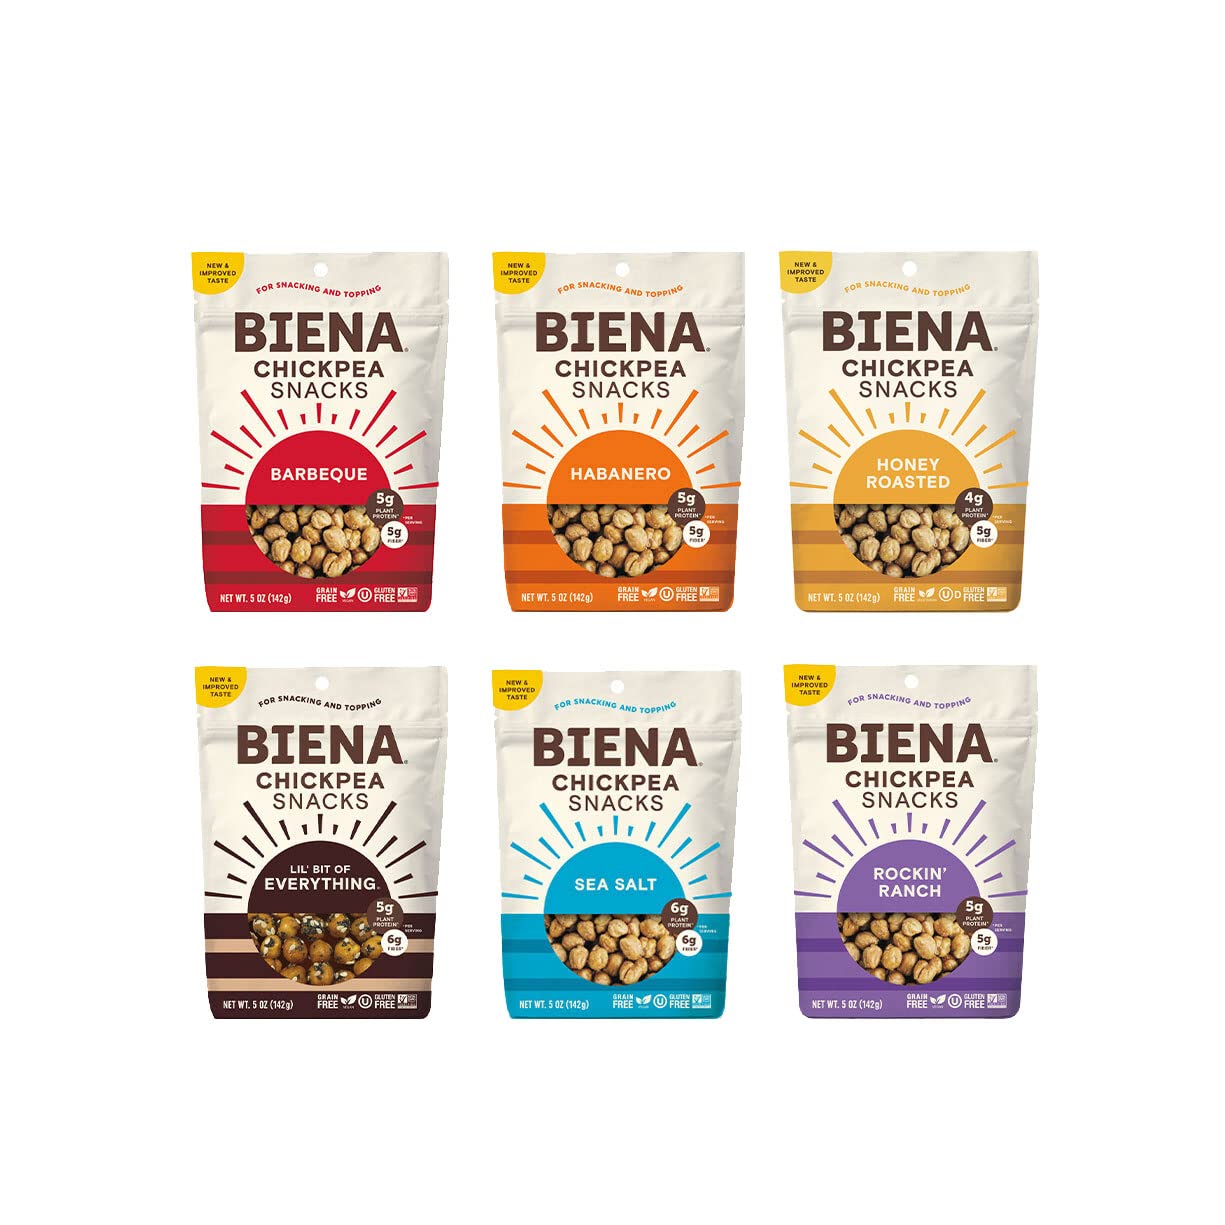 Biena Crispy Roasted Chickpea Snacks, Rockin’ Ranch, High Protein Snacks, High Fiber Snacks, Gluten Free, Plant-Based, Non-GMO, Healthy Snacks for Adults and Kids, 8-Pack 5 Ounce Bags